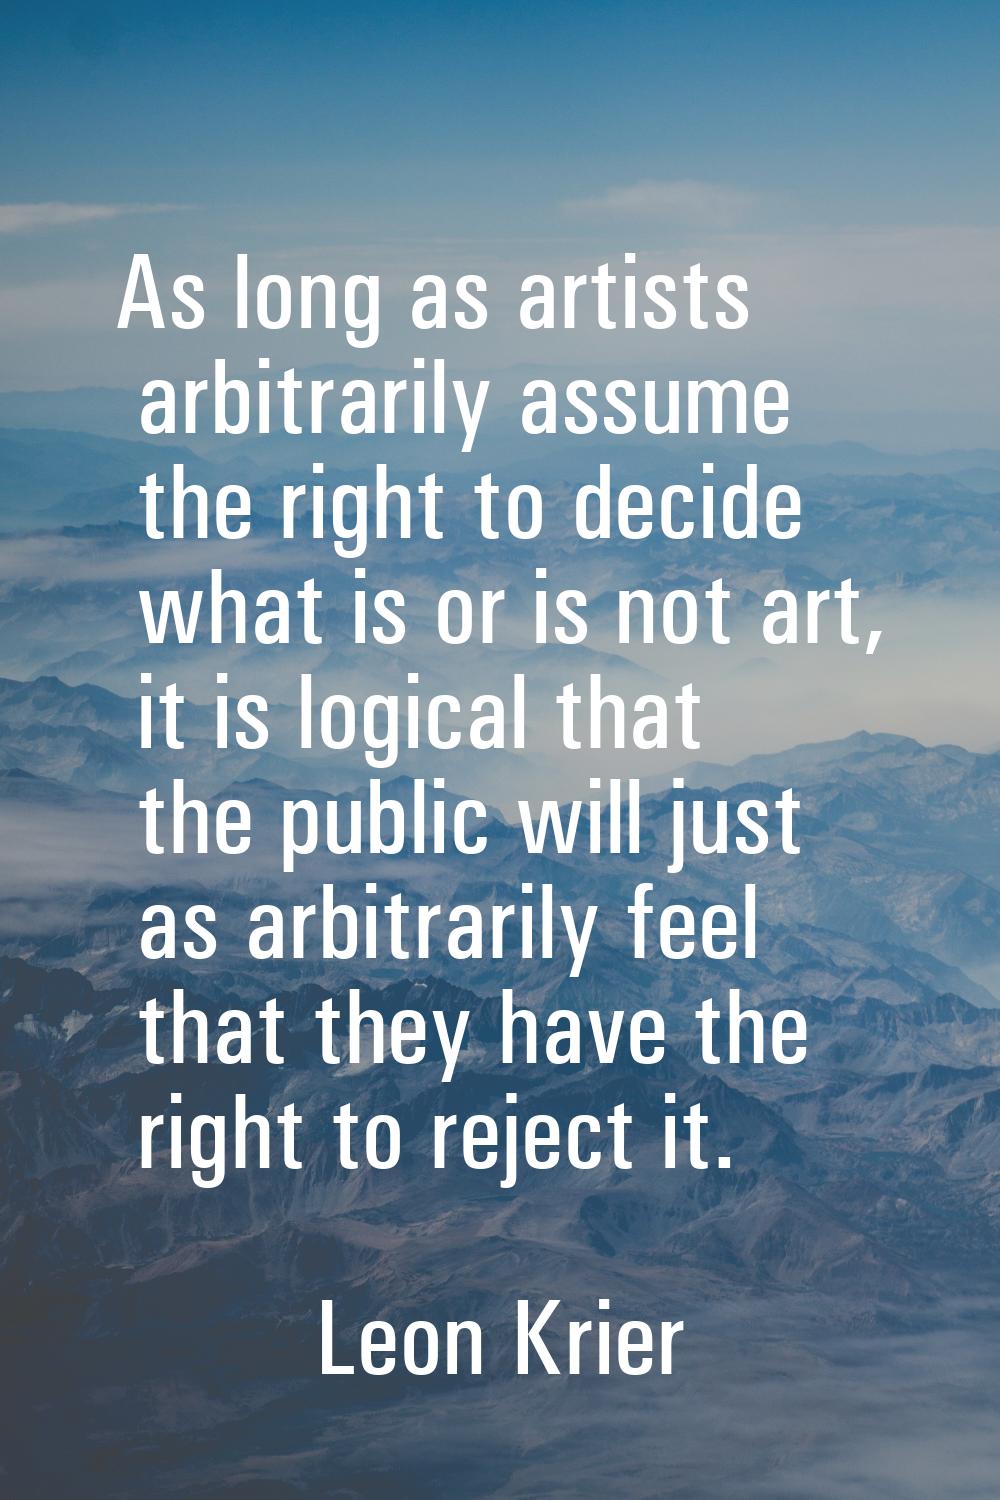 As long as artists arbitrarily assume the right to decide what is or is not art, it is logical that